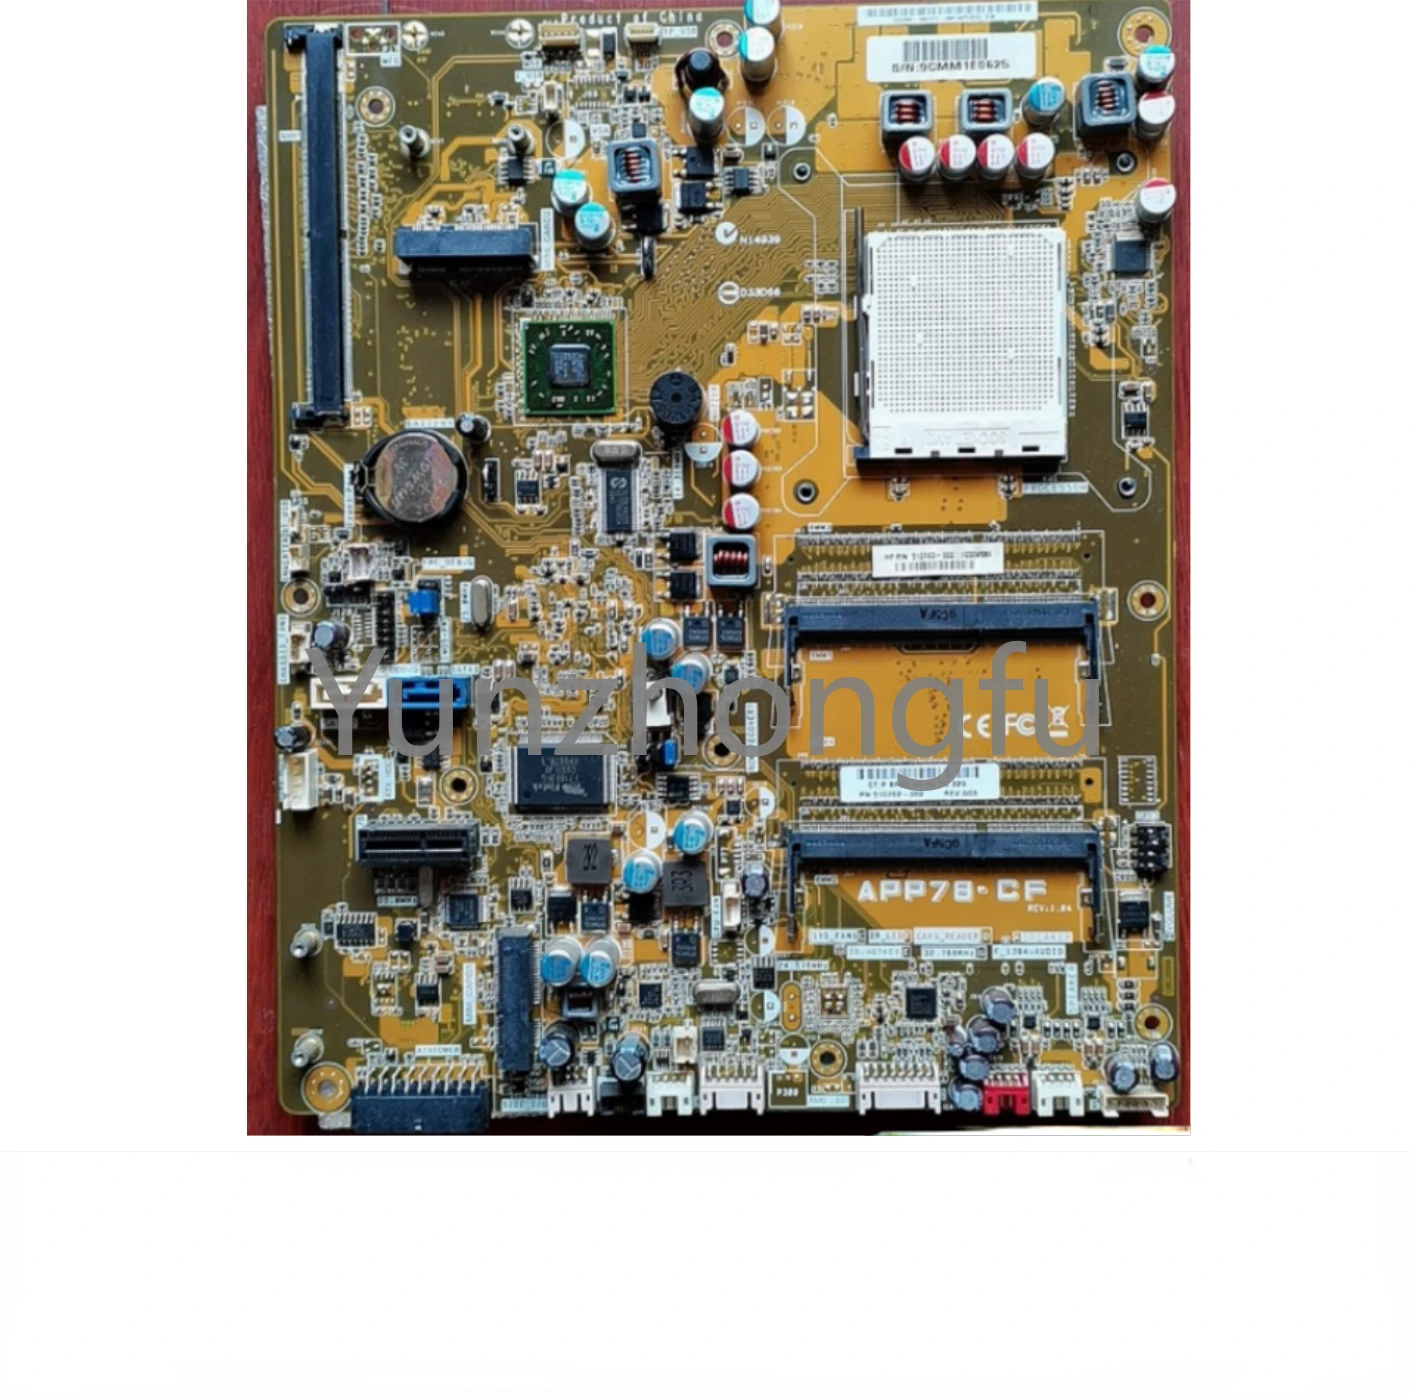 

510762-001 is suitable for intelligent touch 300 300 300-1040 inch AIO motherboard APP78-CF 510762-002 100% testing